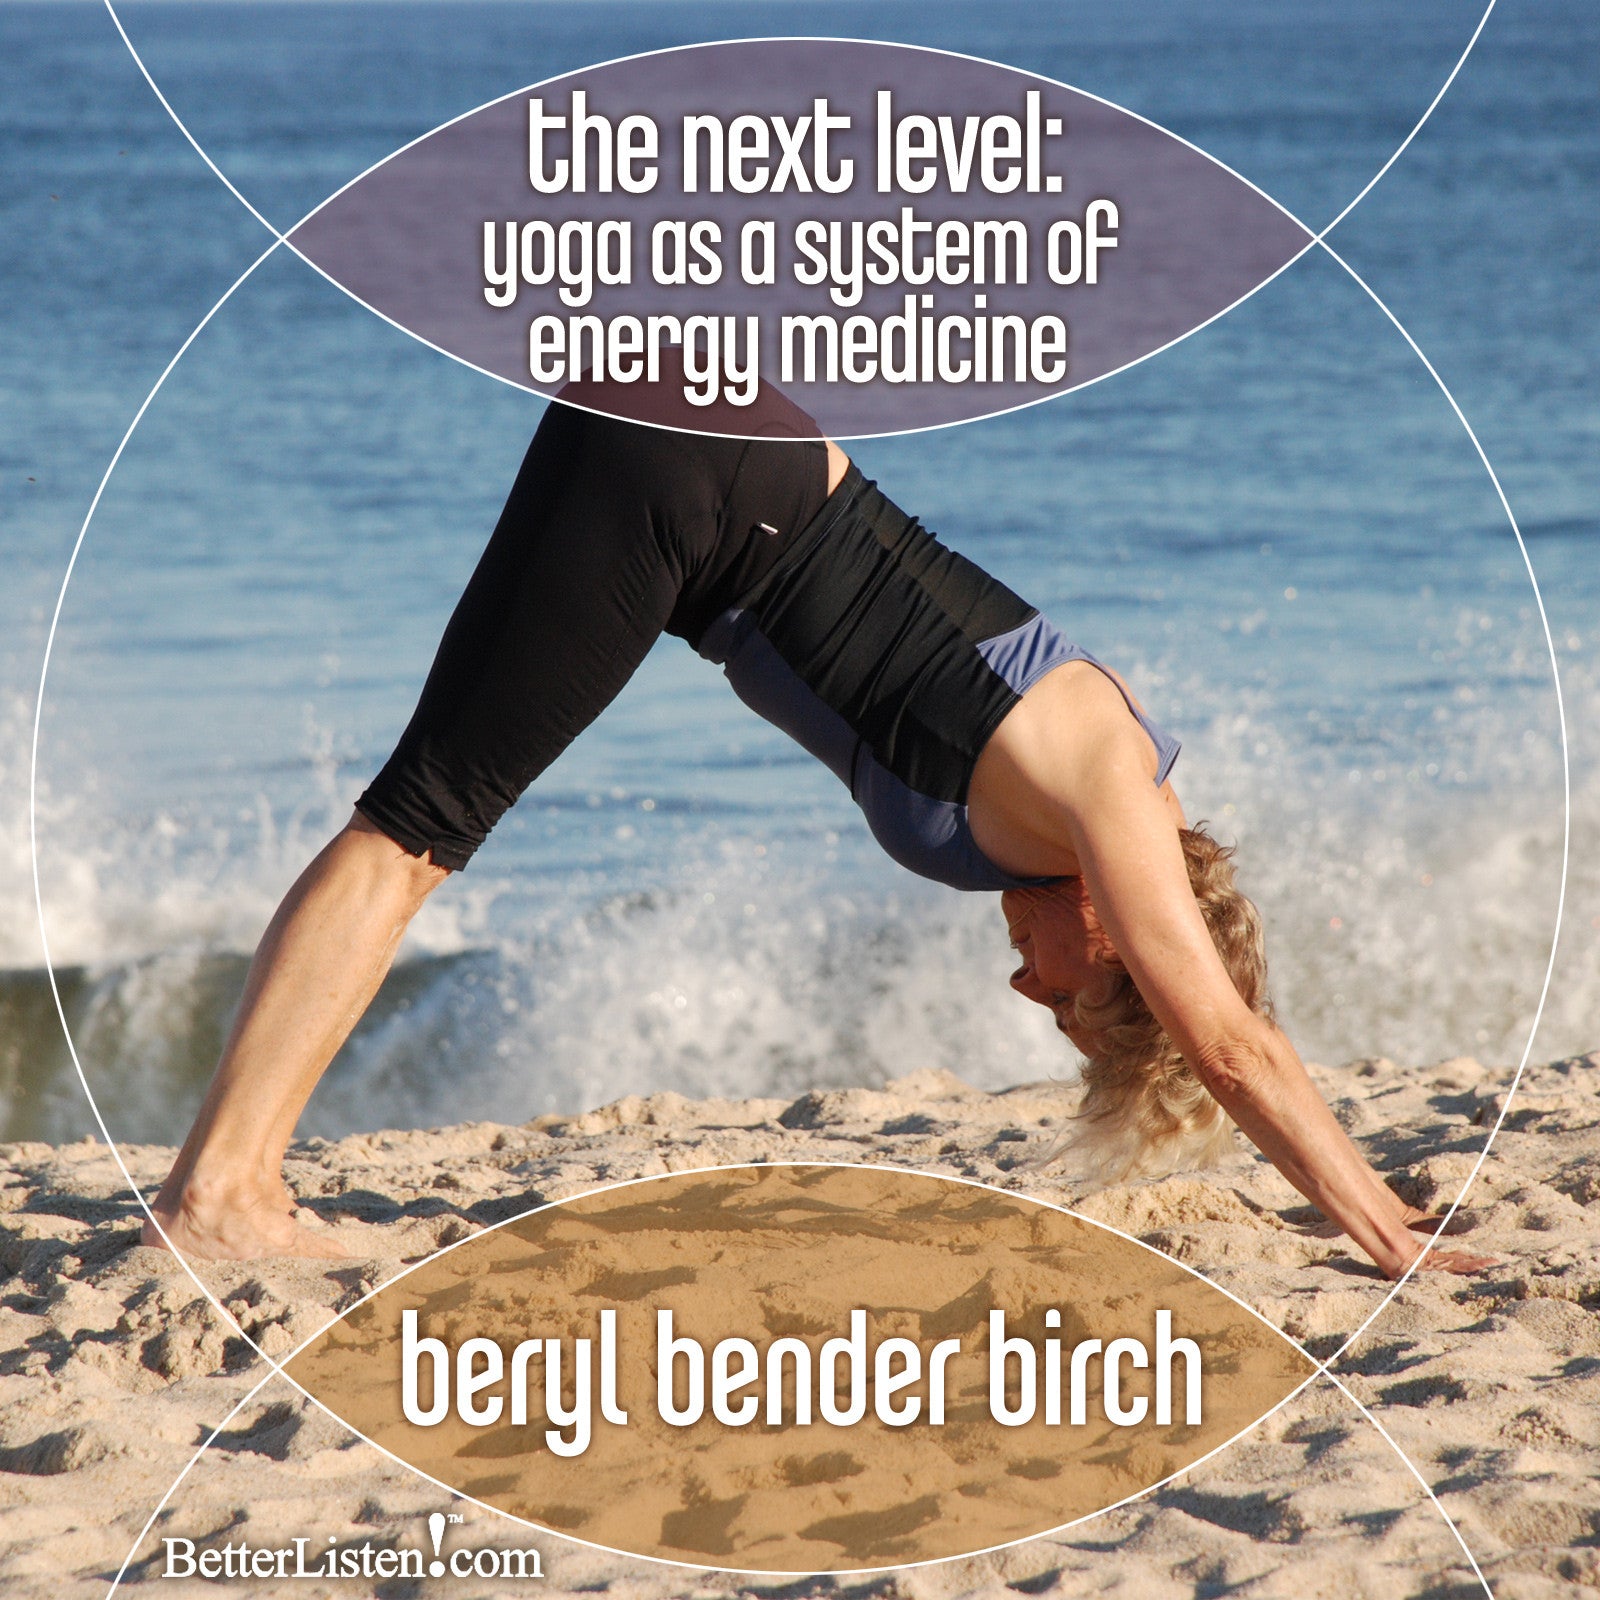 The Next Level: Yoga as a System of Energy Medicine with Beryl Bender Birch - BetterListen!